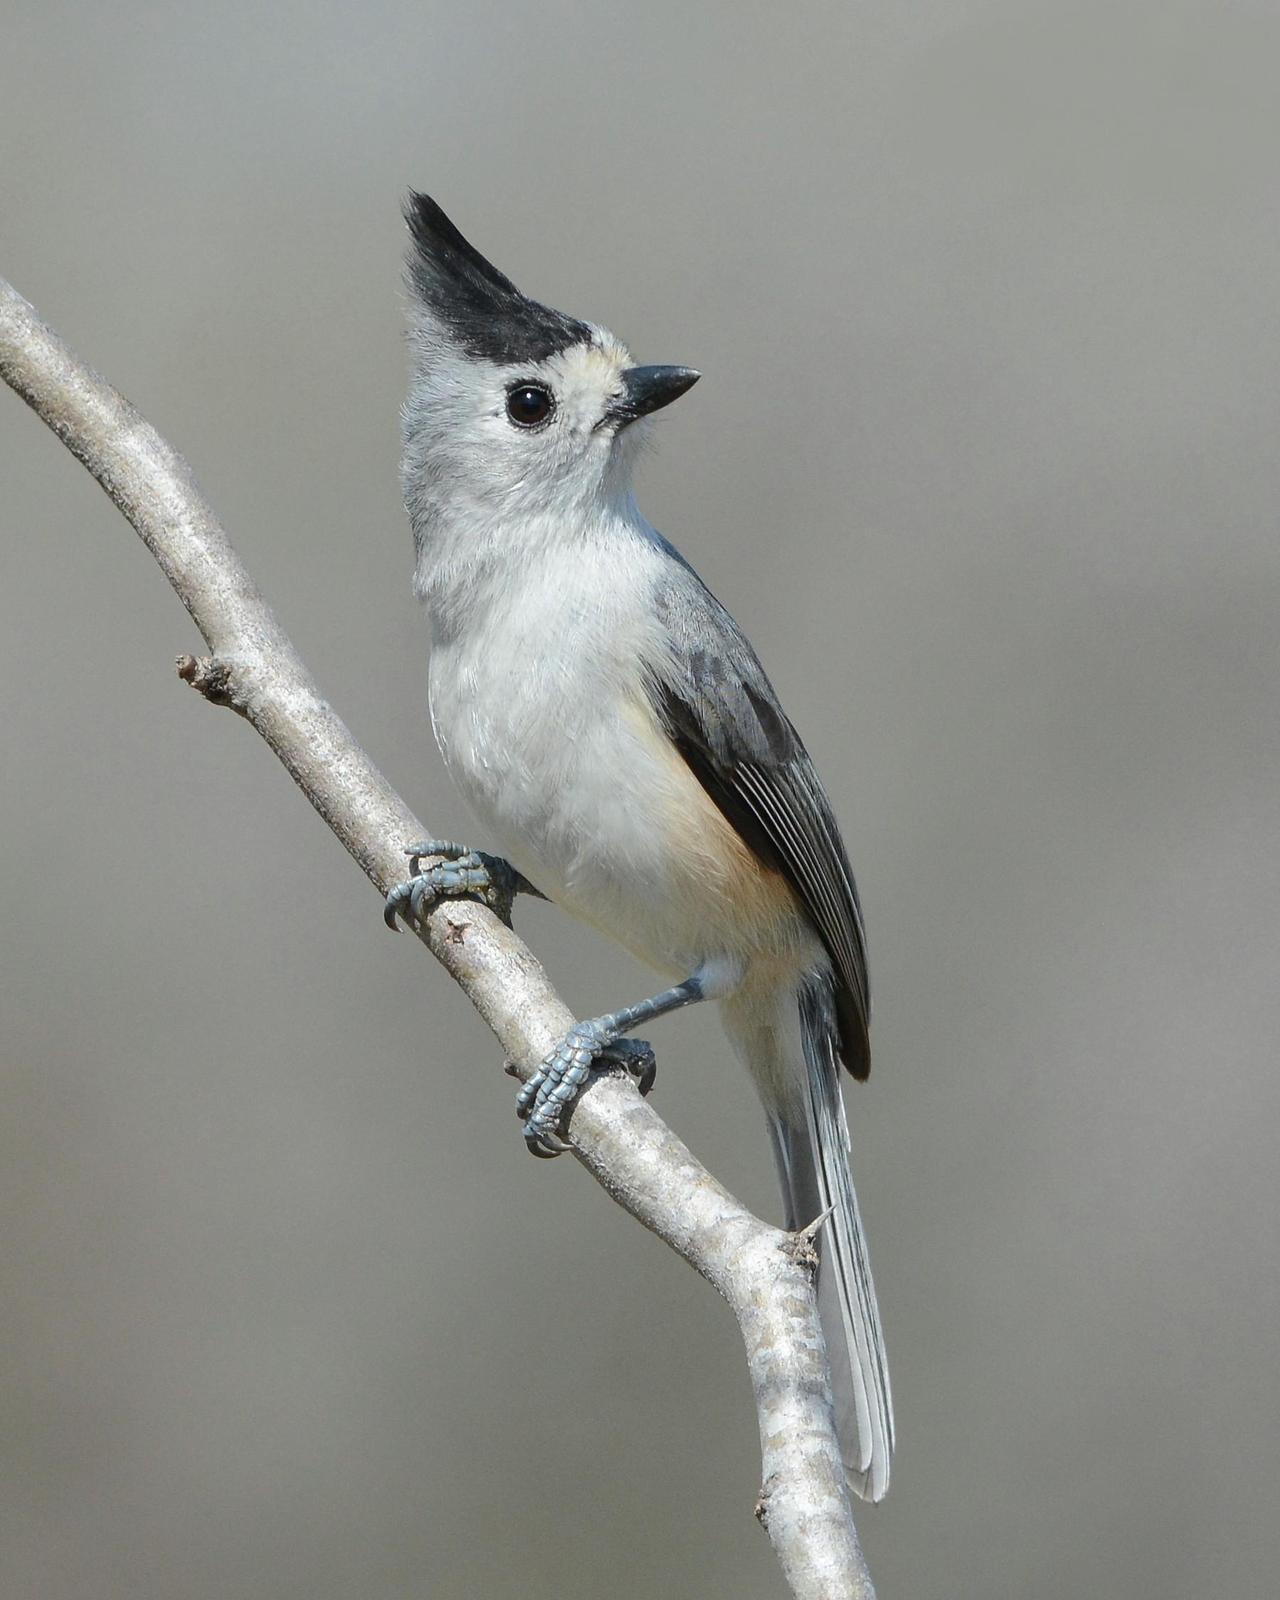 Black-crested Titmouse Photo by David Hollie